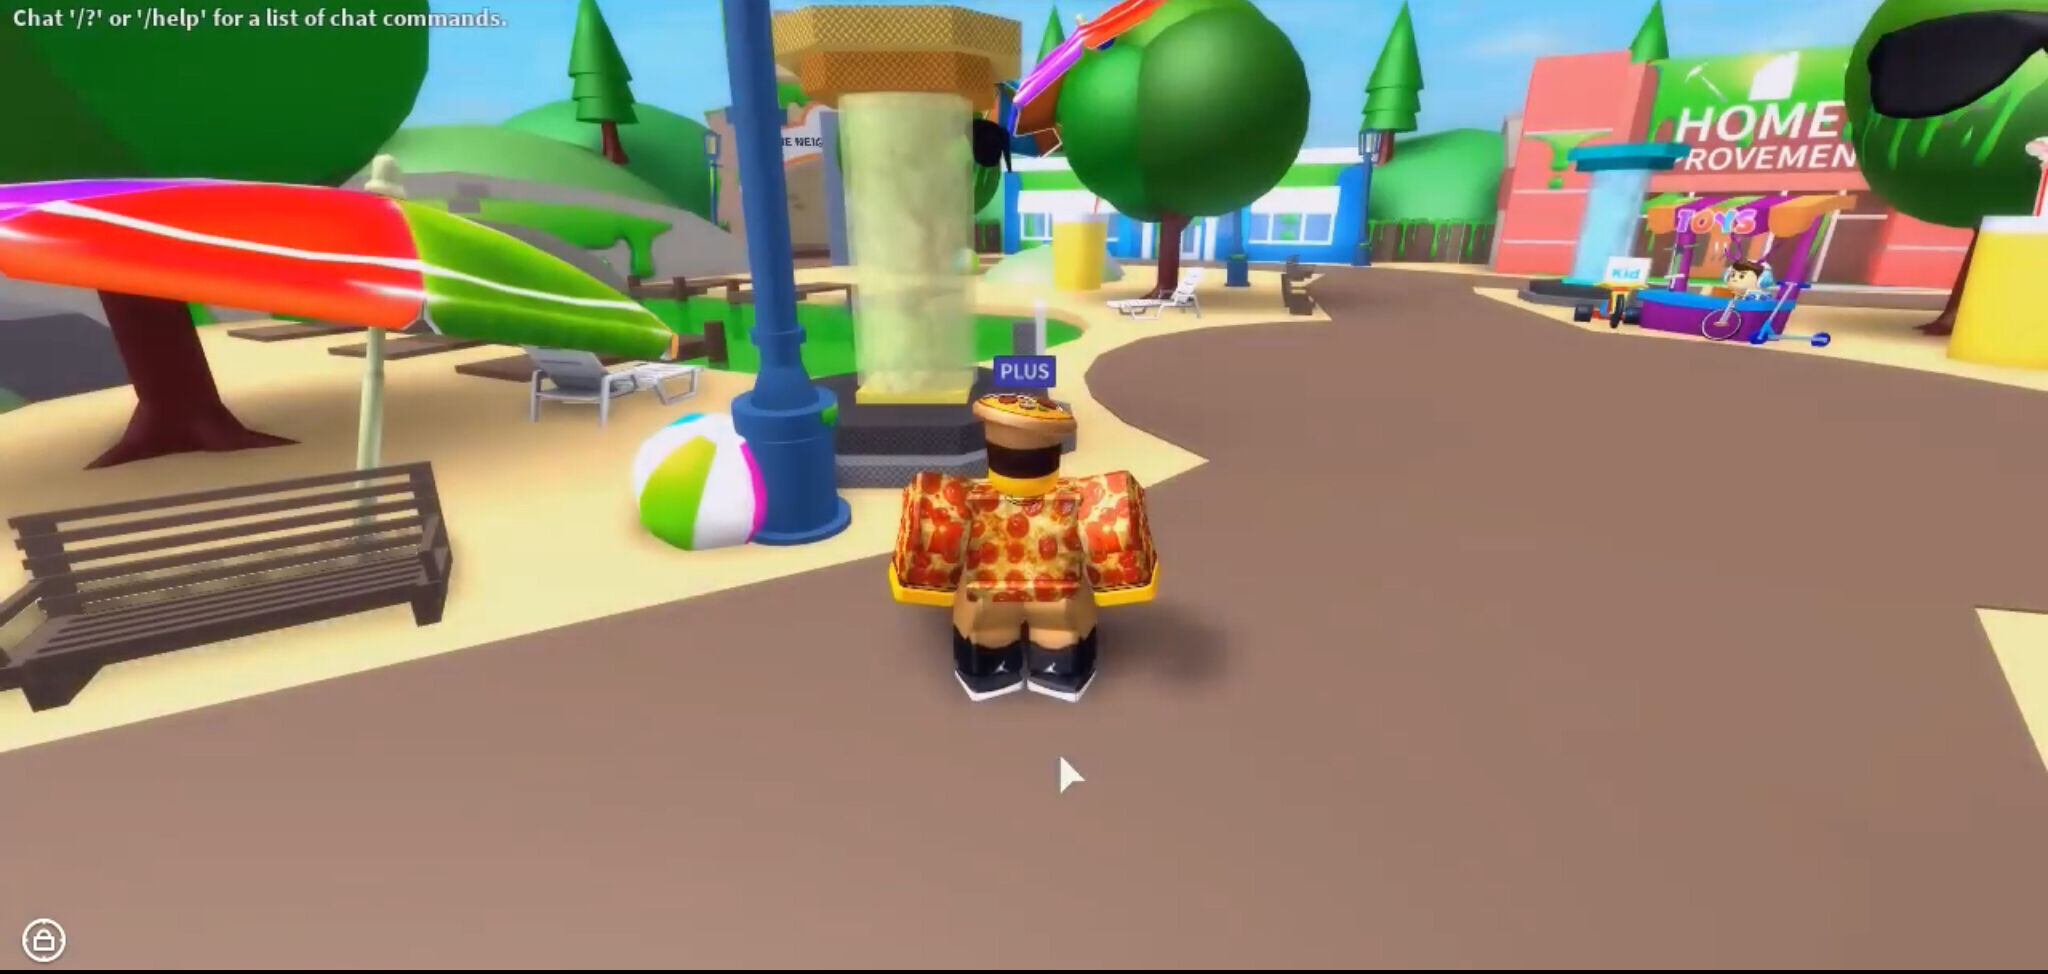 Roblox on X: MeepCity is the first-ever #Roblox game to reach ONE